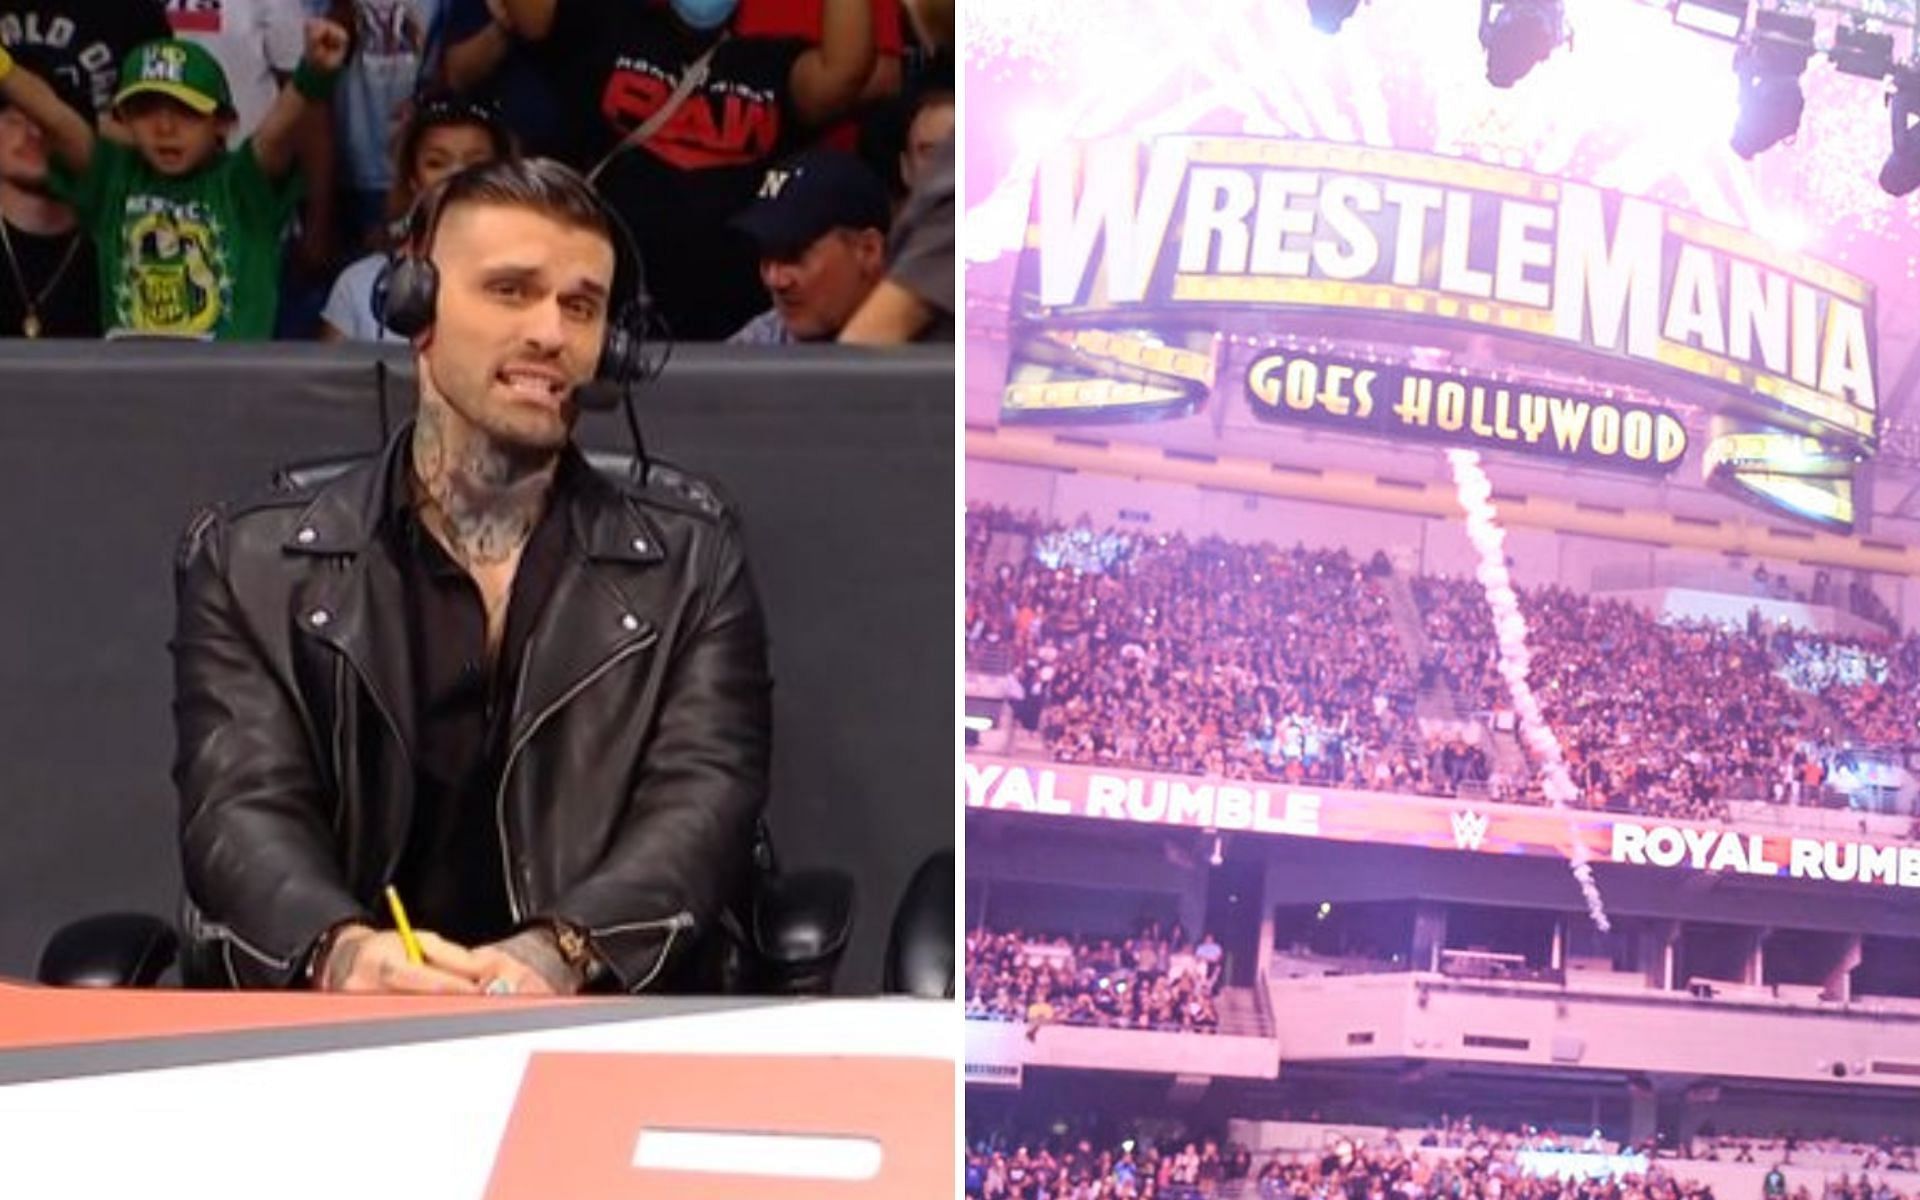 Which match at WrestleMania did Graves describe as a possible &quot;car crash&quot;?